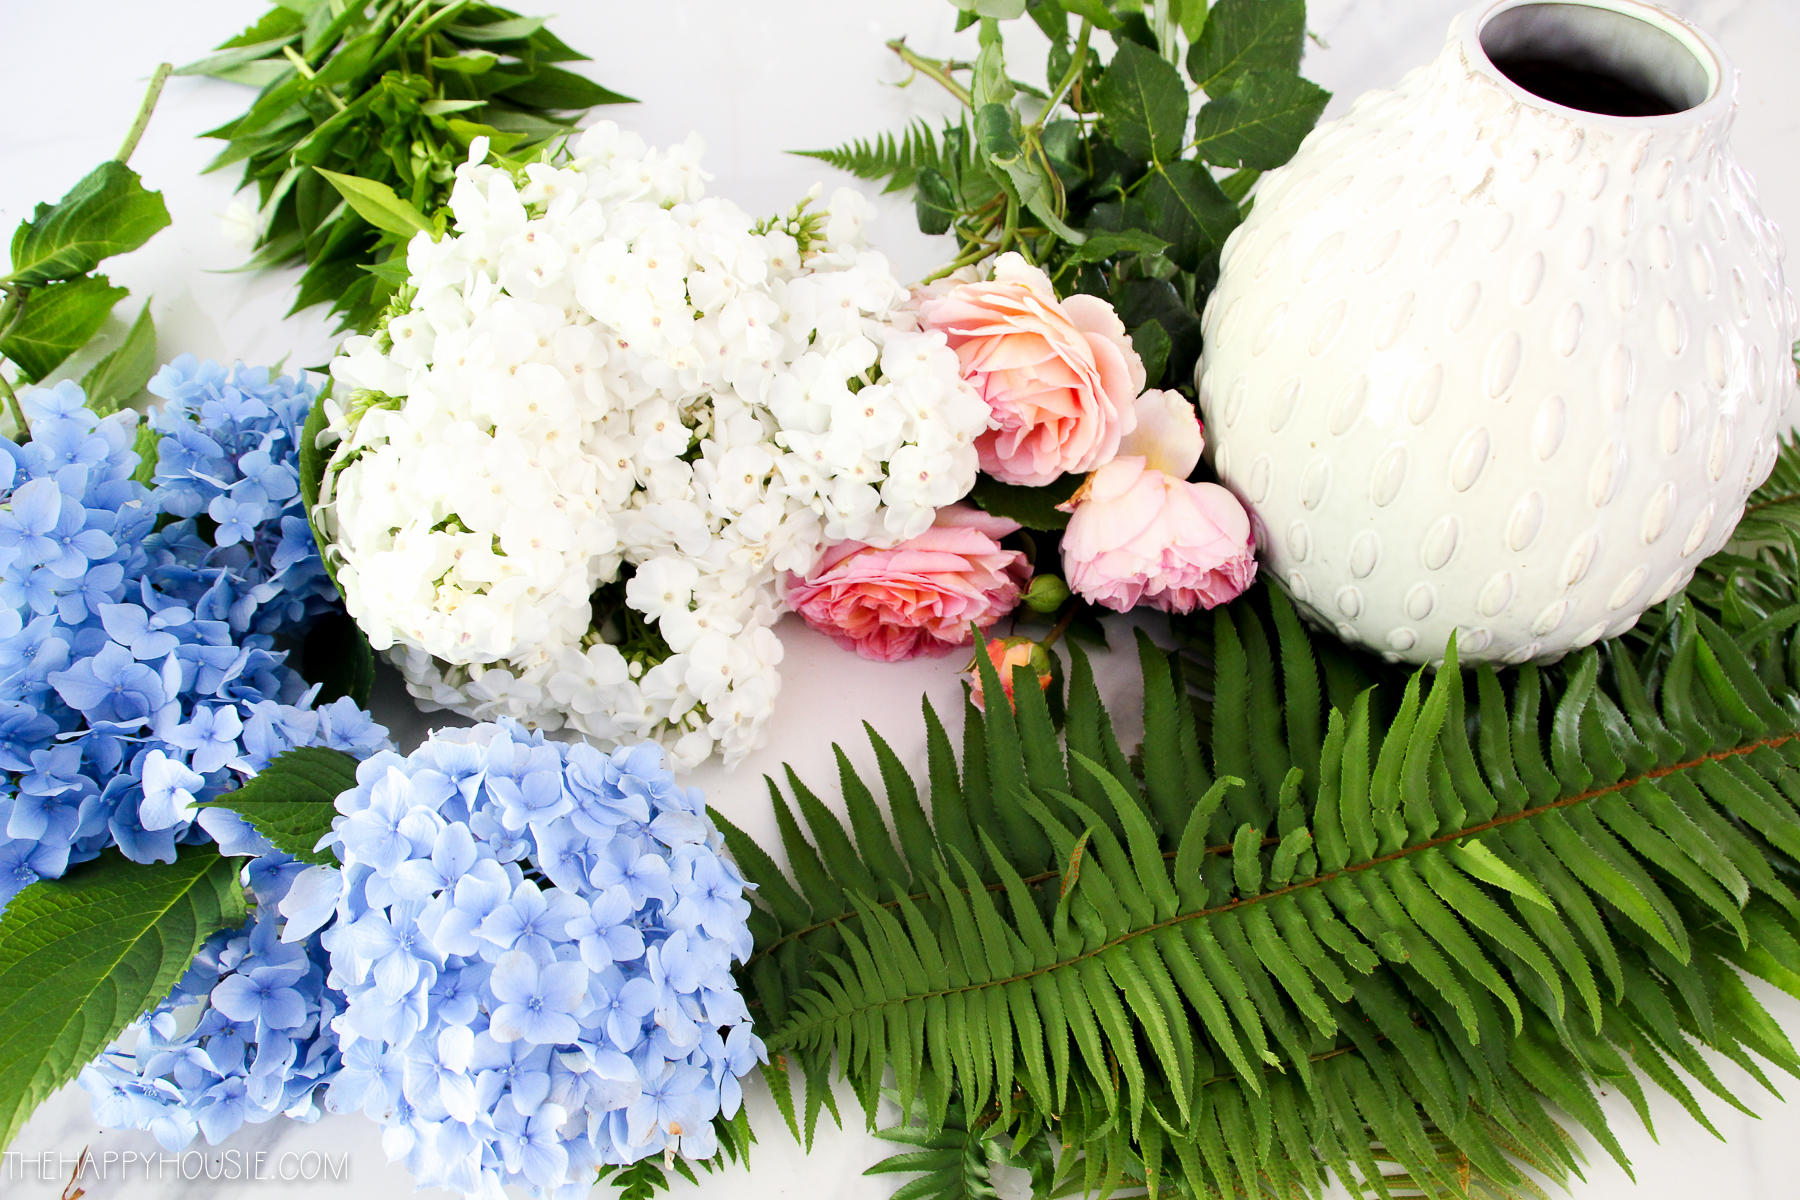 Pretty flowers and ferns laid out beside a white vase.